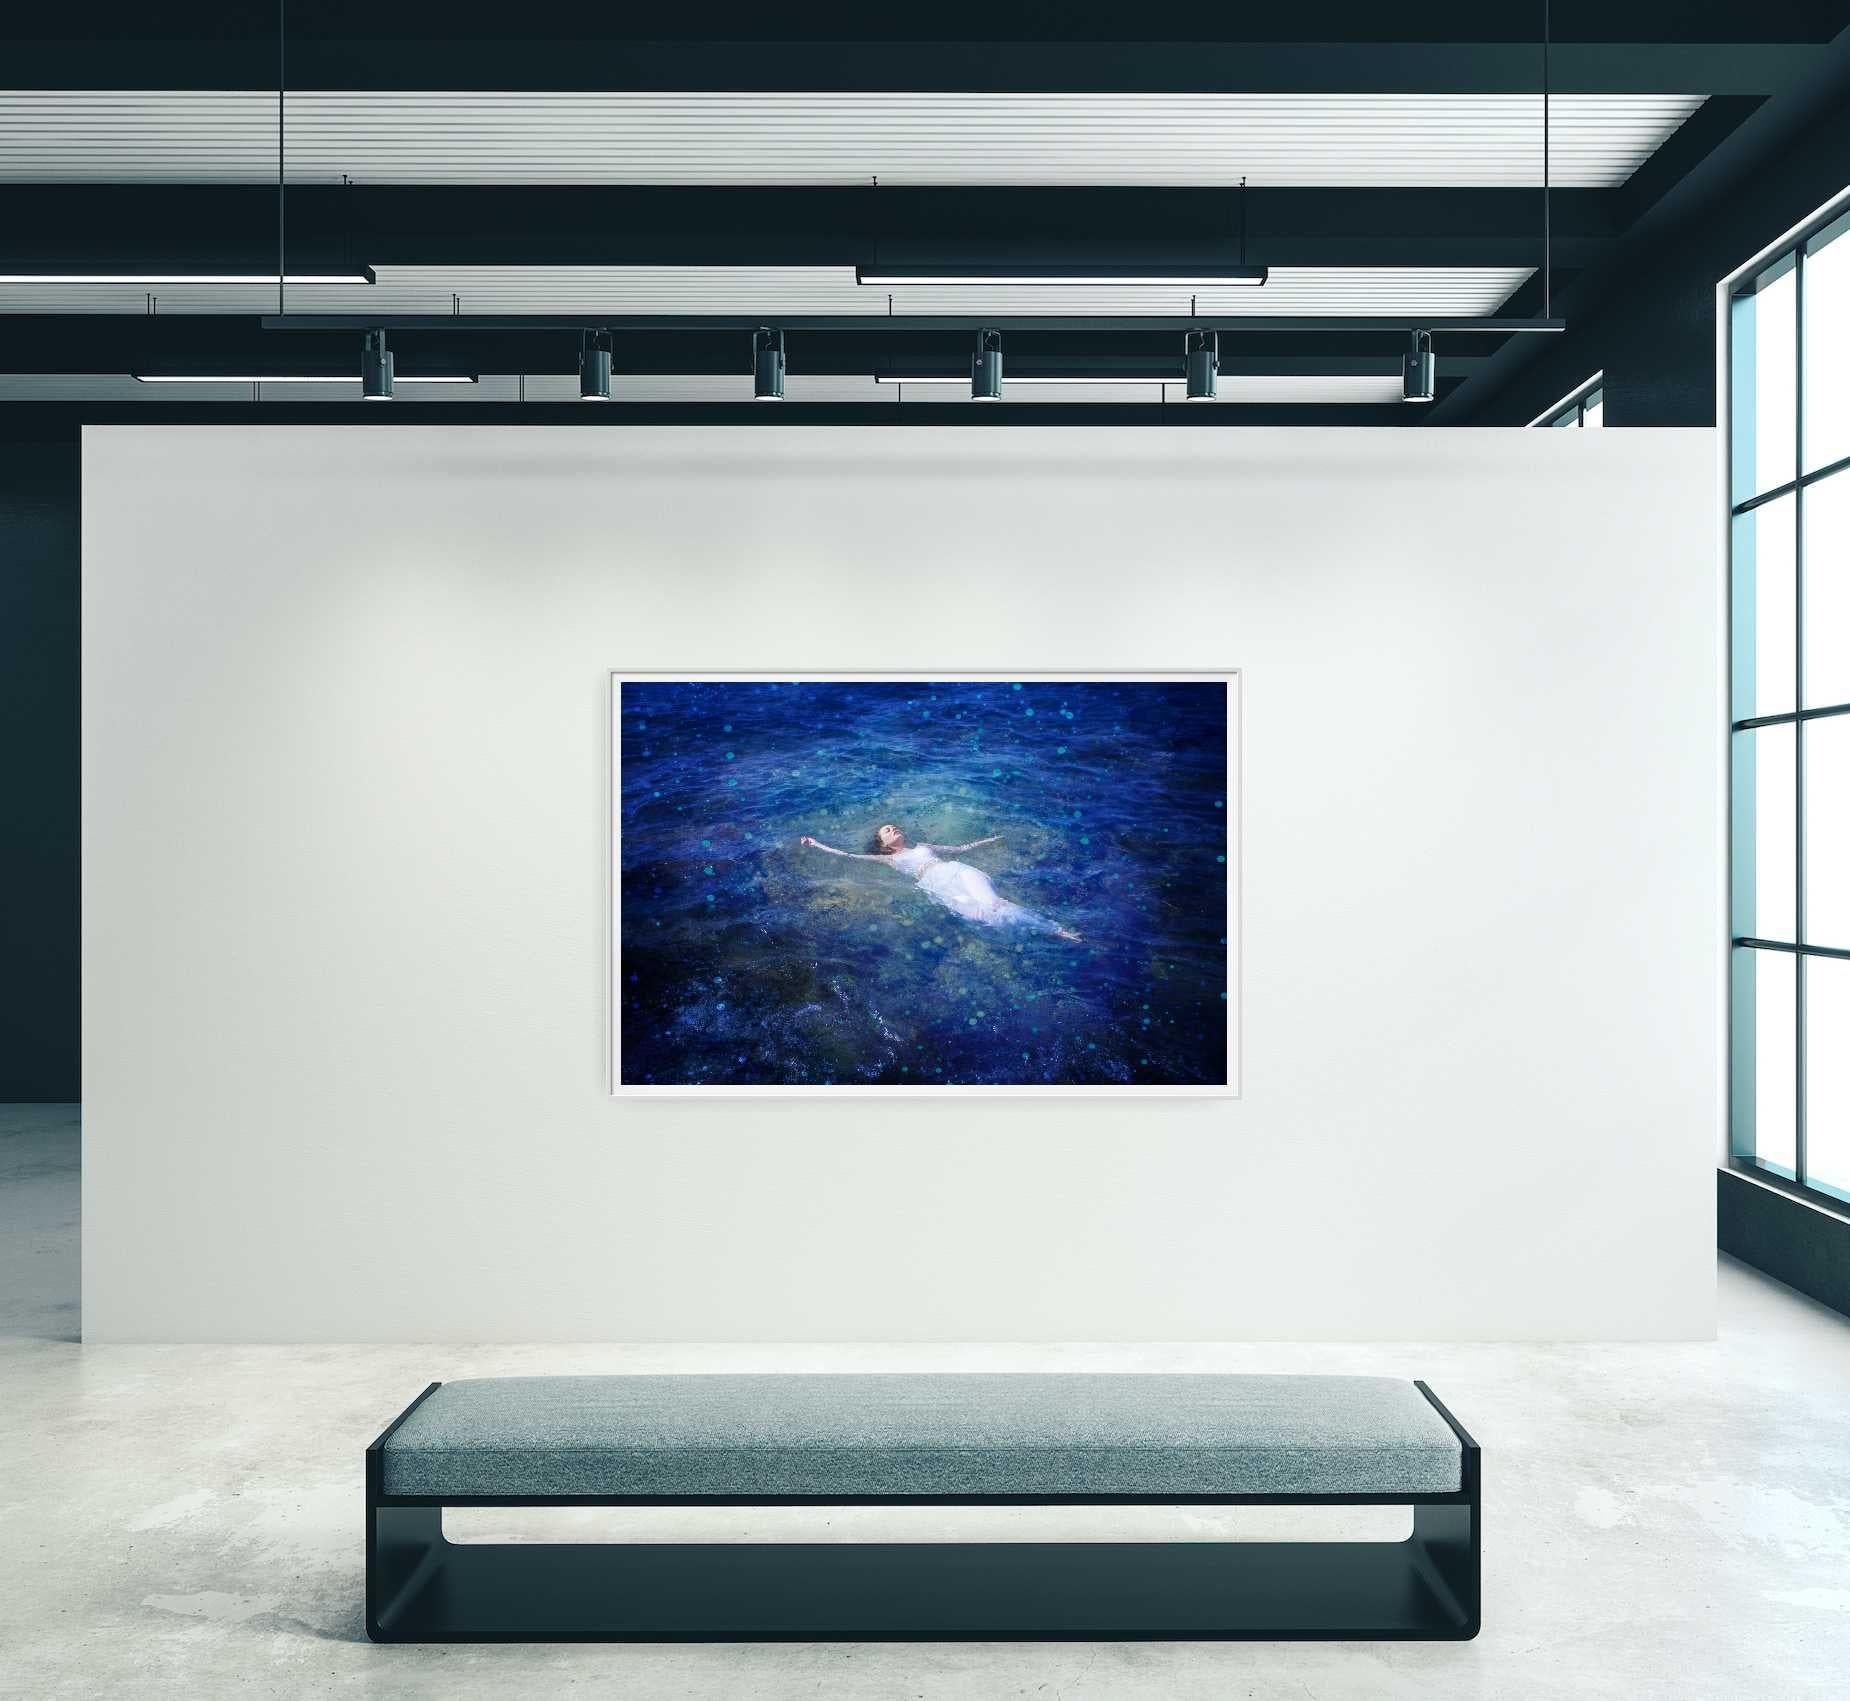 Made in Ibiza. Fine art photography 2018. The artwork/photo is sold unframed (only the art print).    The photograph is offered in the following sizes:    MEDIUM SIZE: 70 x 105cm - 7 copies  LARGE SIZE: 98 x 147cm - 7 copies  MUSEUM SIZE: 120 x 180